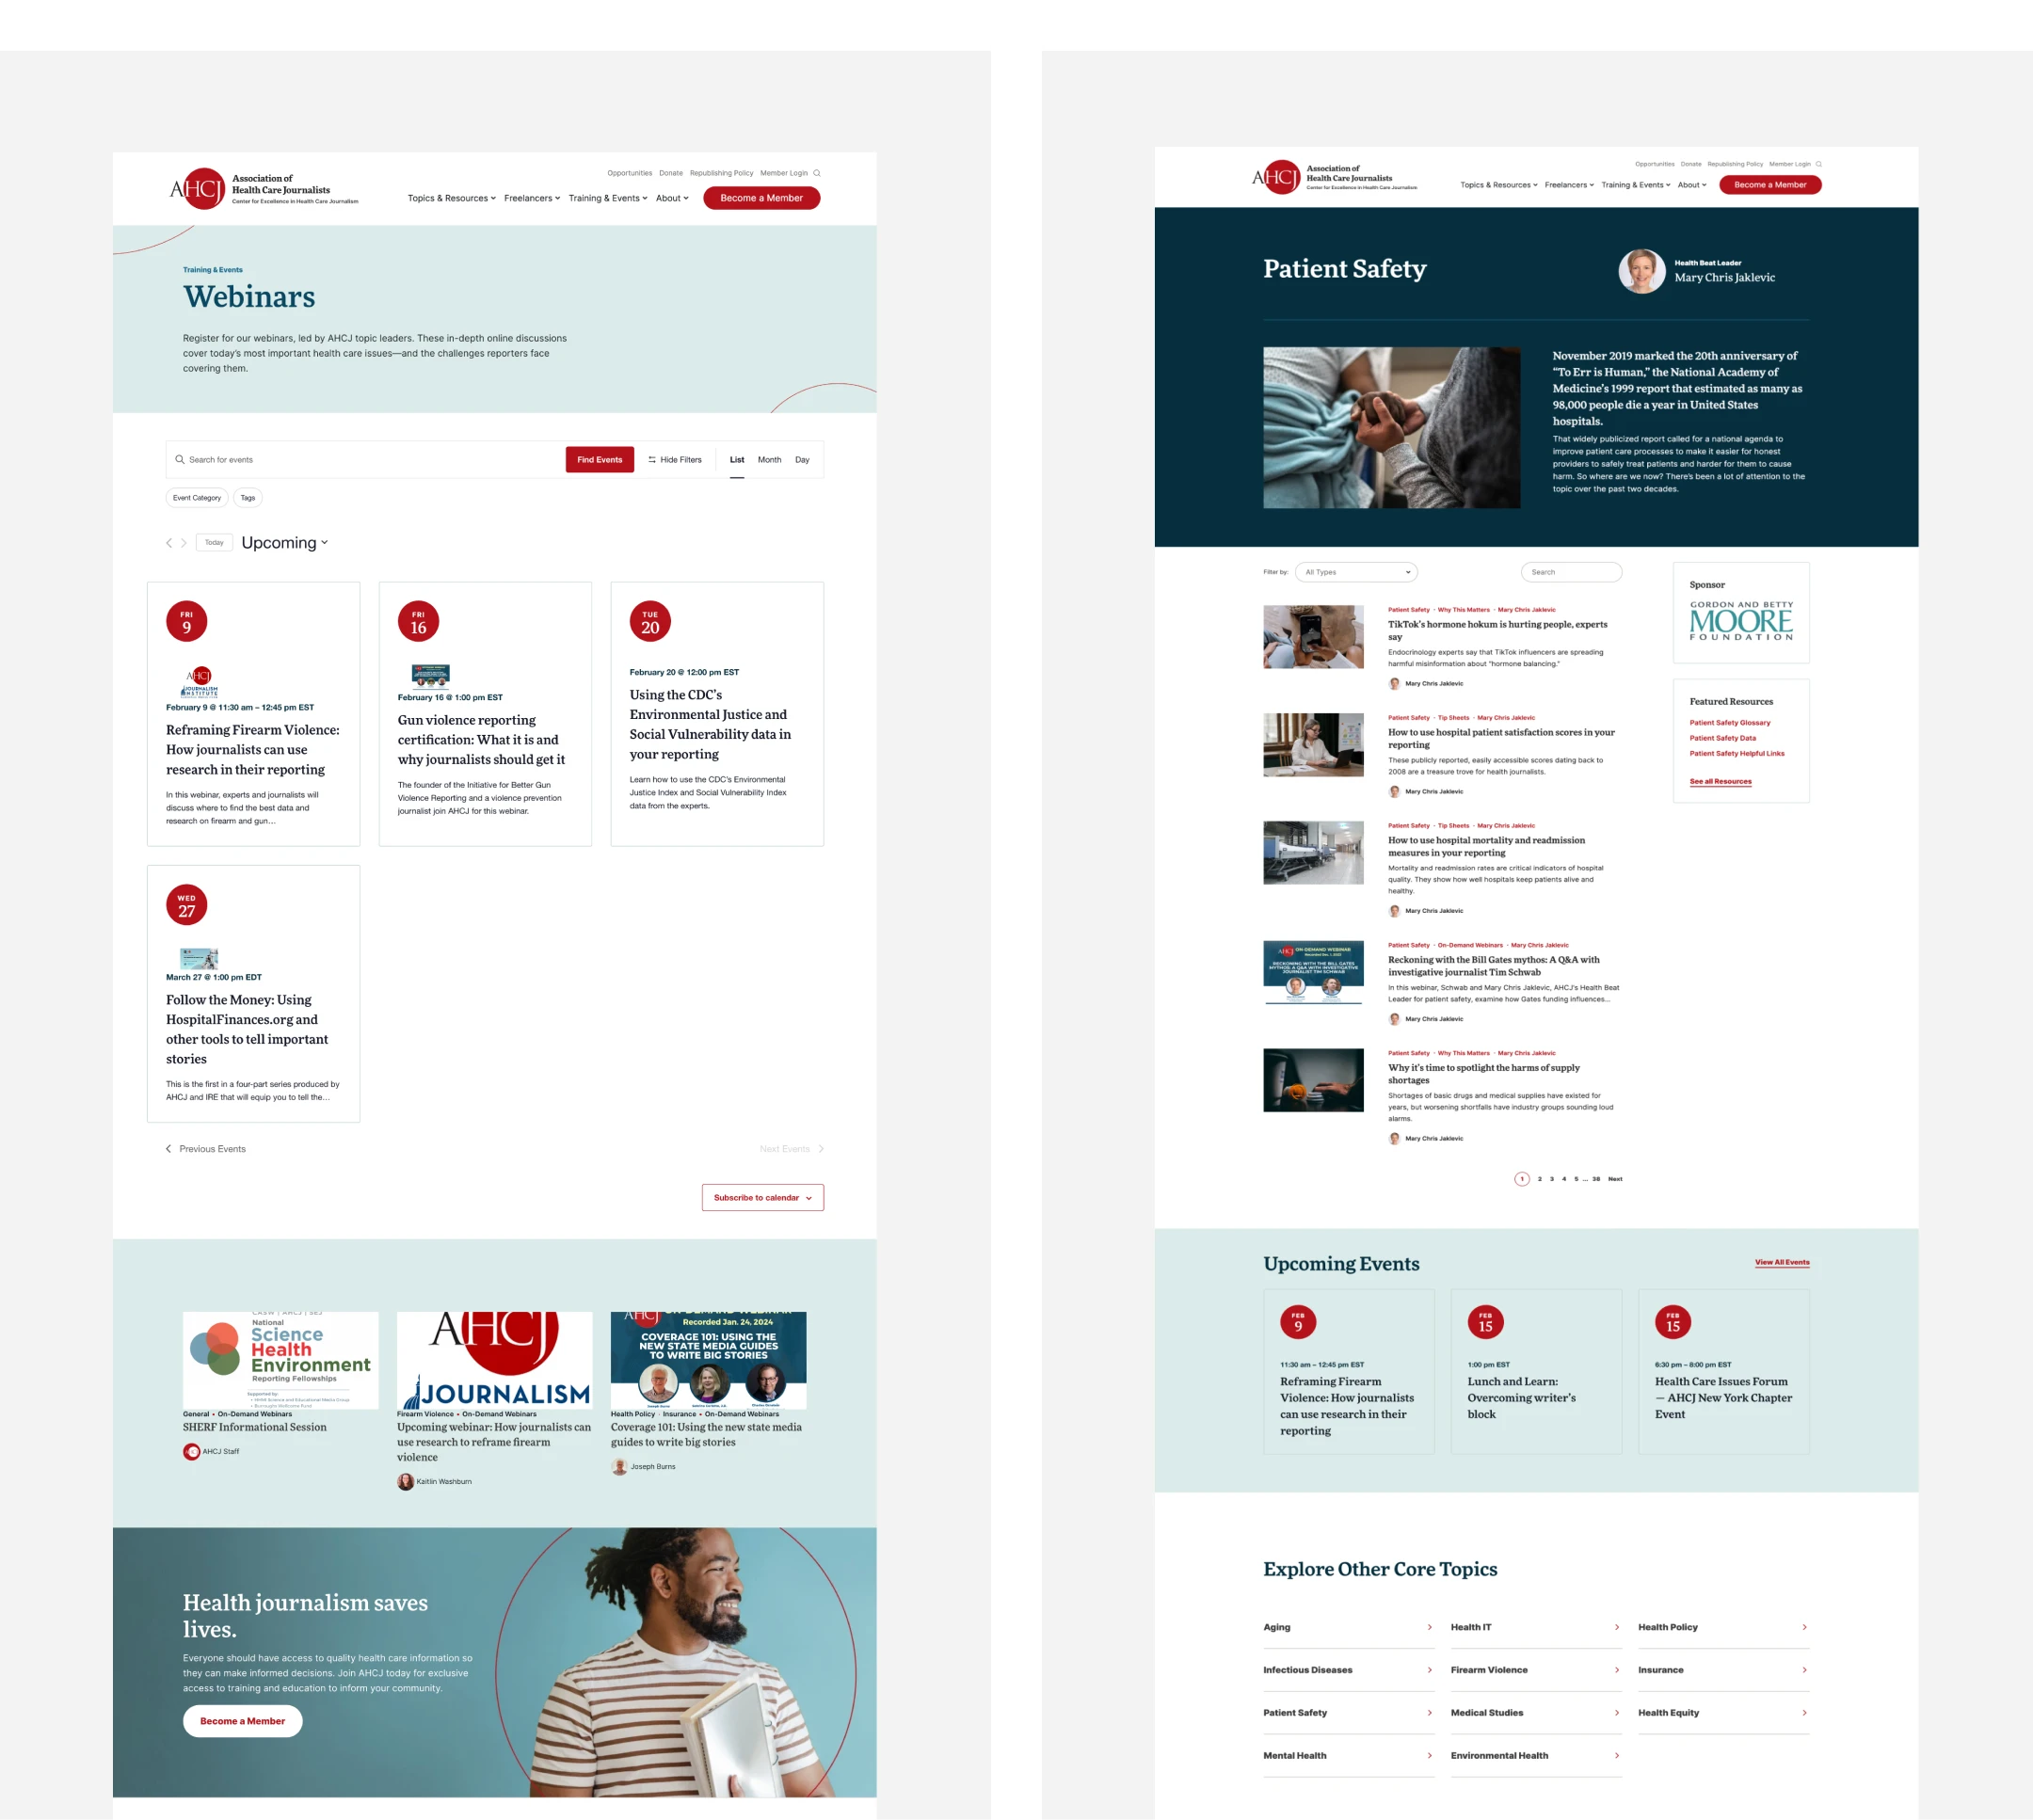 AHCJ UX/UI design for the webinars page and the patient safety page.